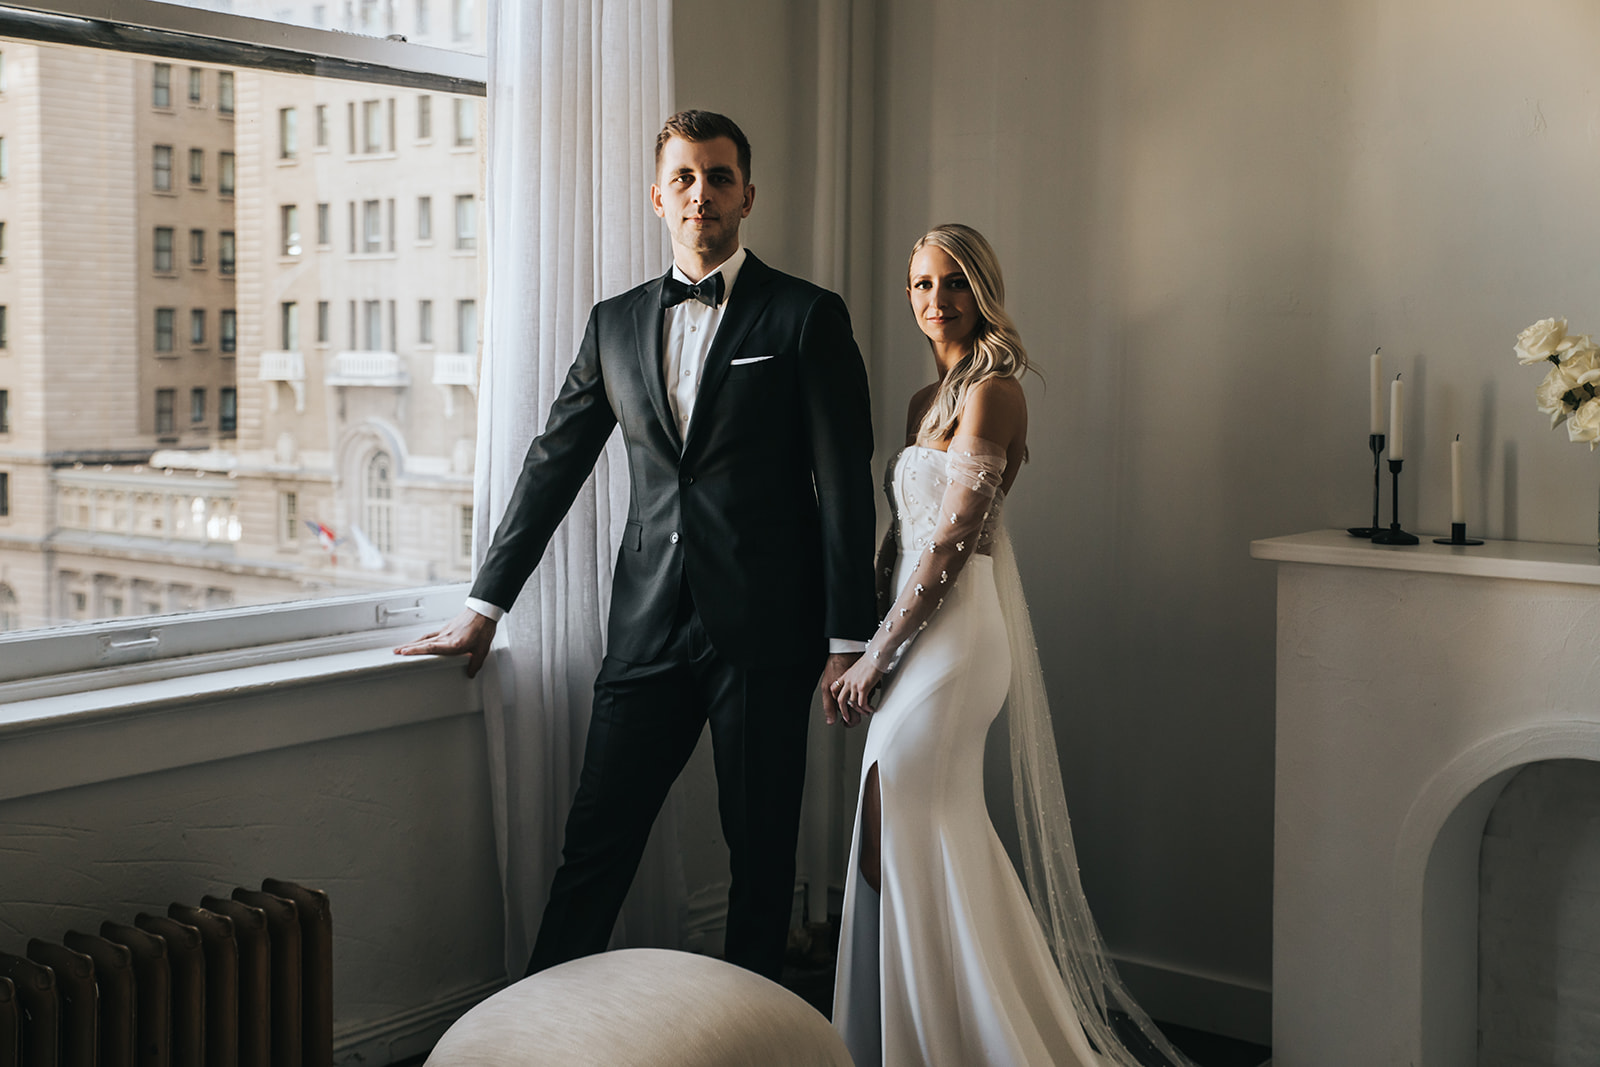 A sparkling New Year's Eve Wedding at The Brownstone in Calgary with couples first look and private vows.